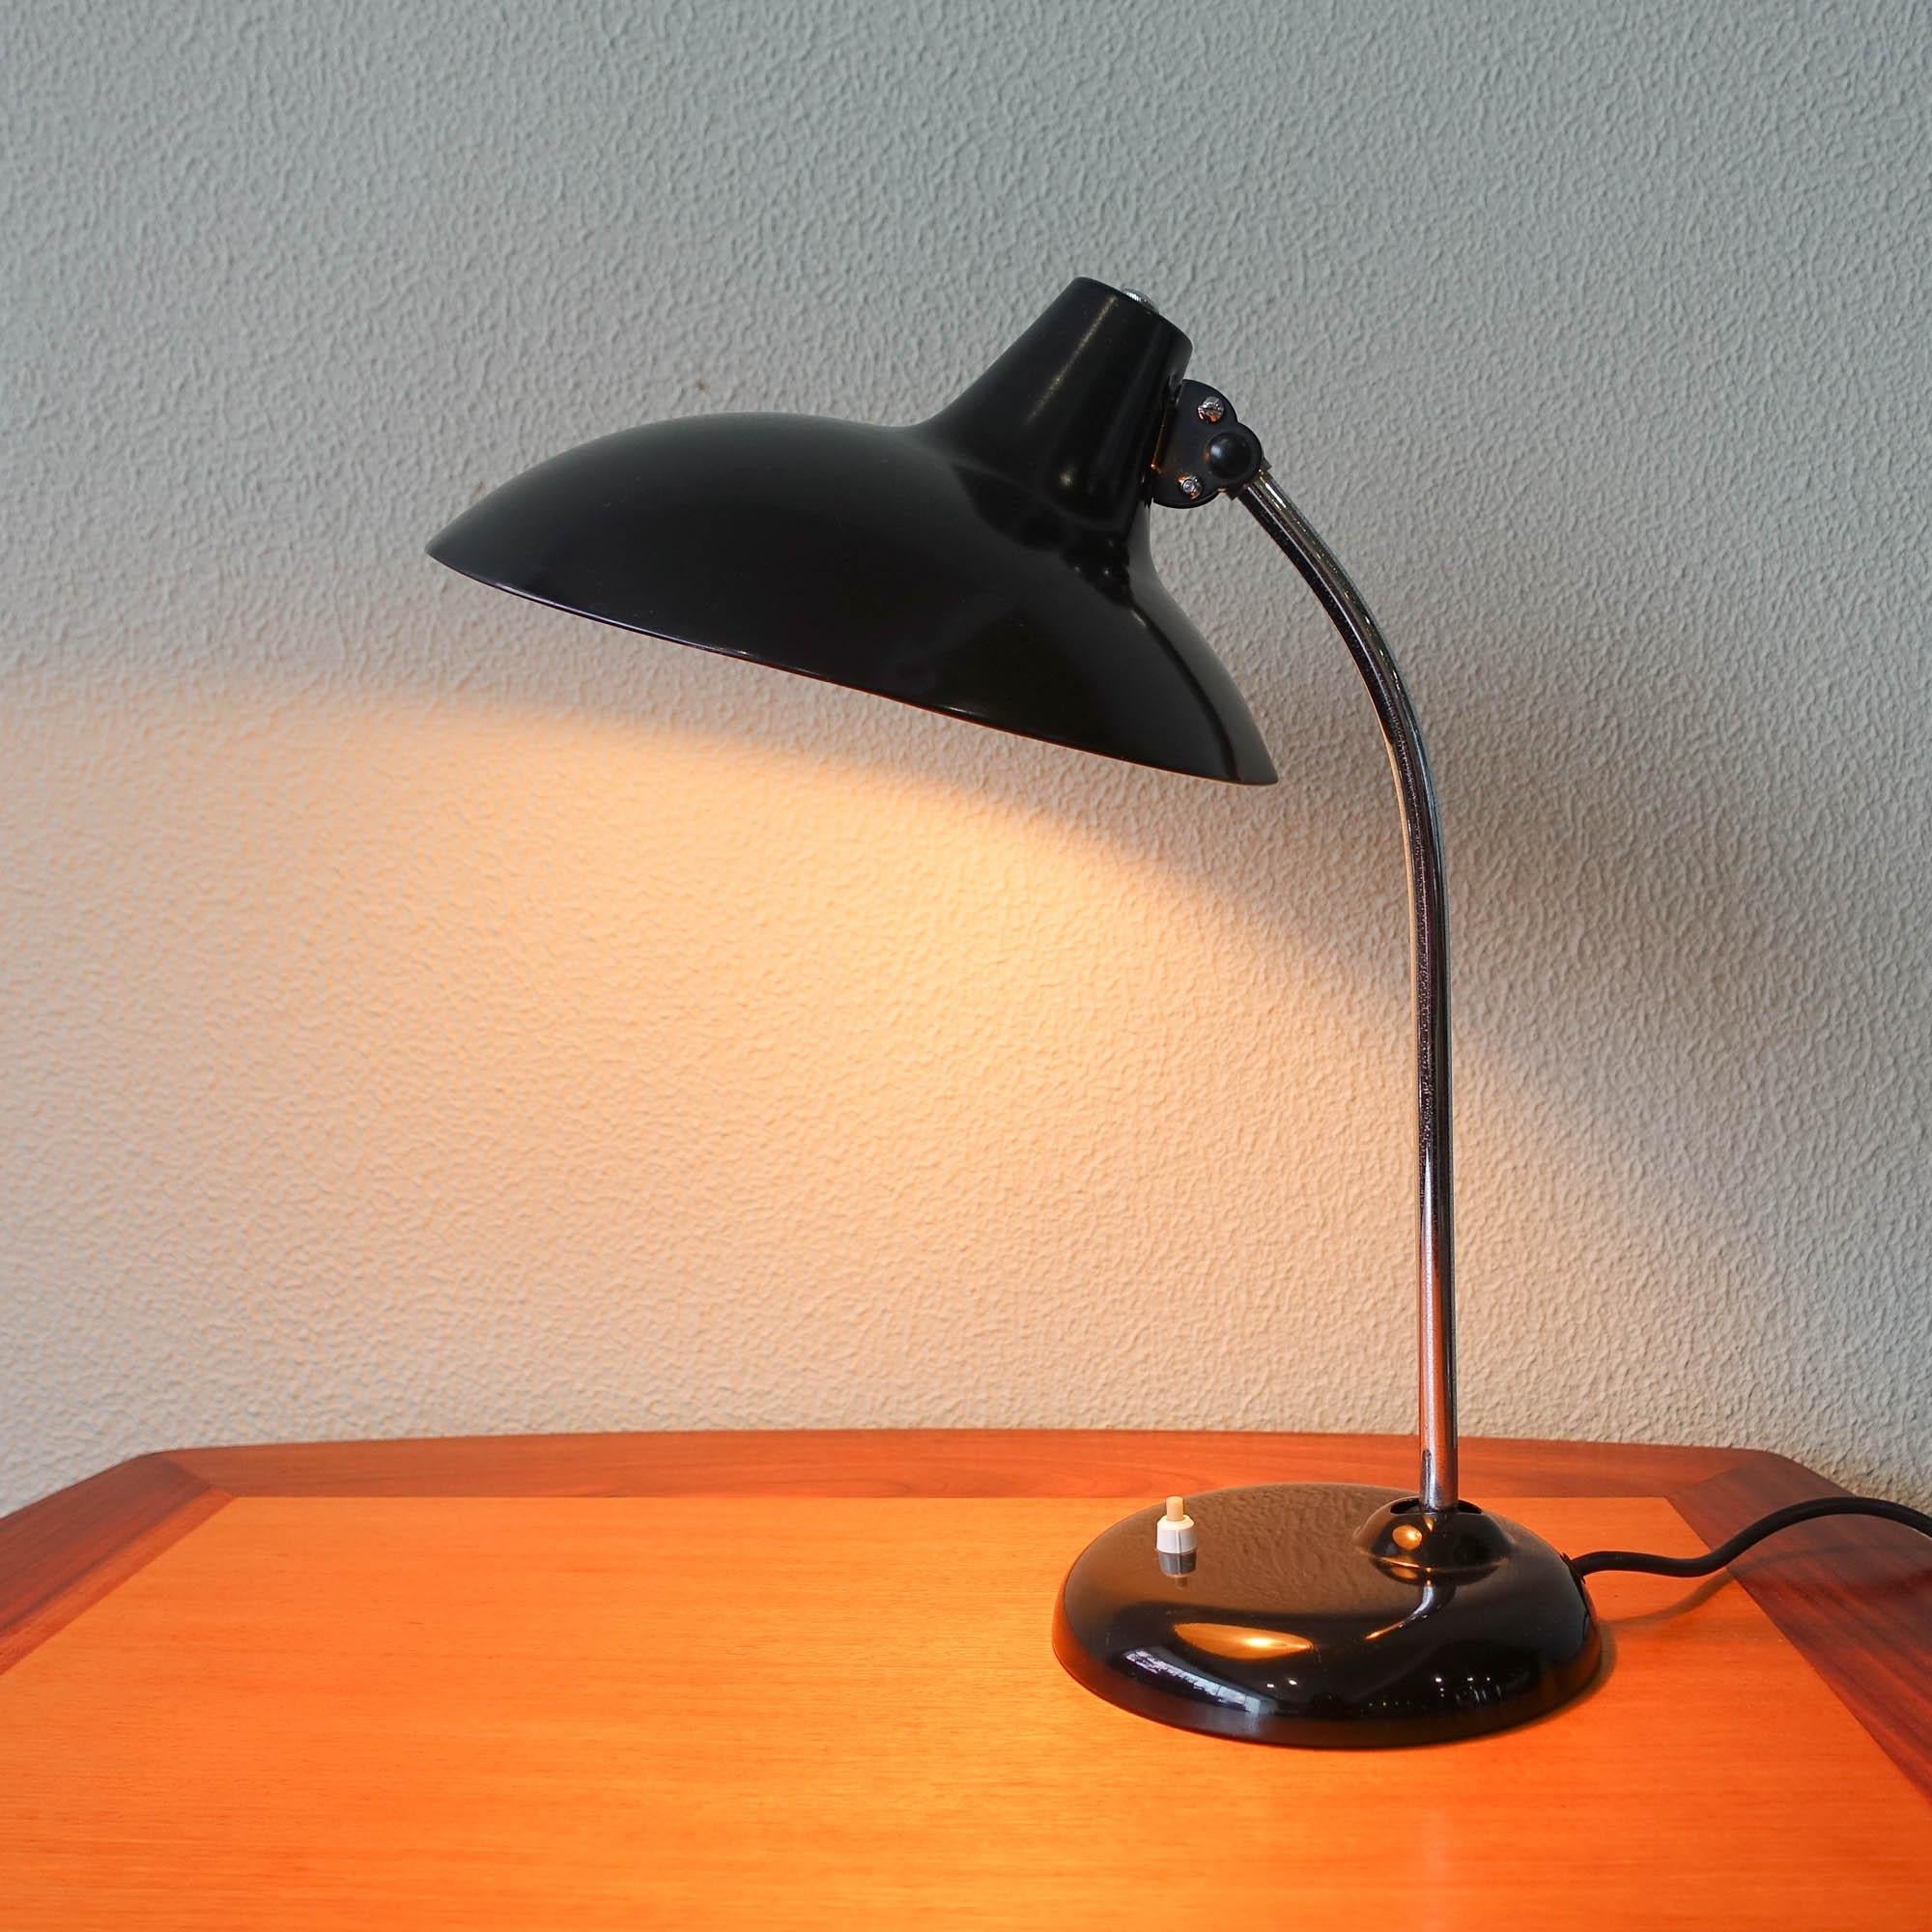 This 6786 model table lamp was designed between 1920-1940 by Christian Dell, and manufactured by Kaiser Idell. It features an adjustable black lacquered metal shade, with an adjustable chromed stem. This lamp was completely restored and it is in a